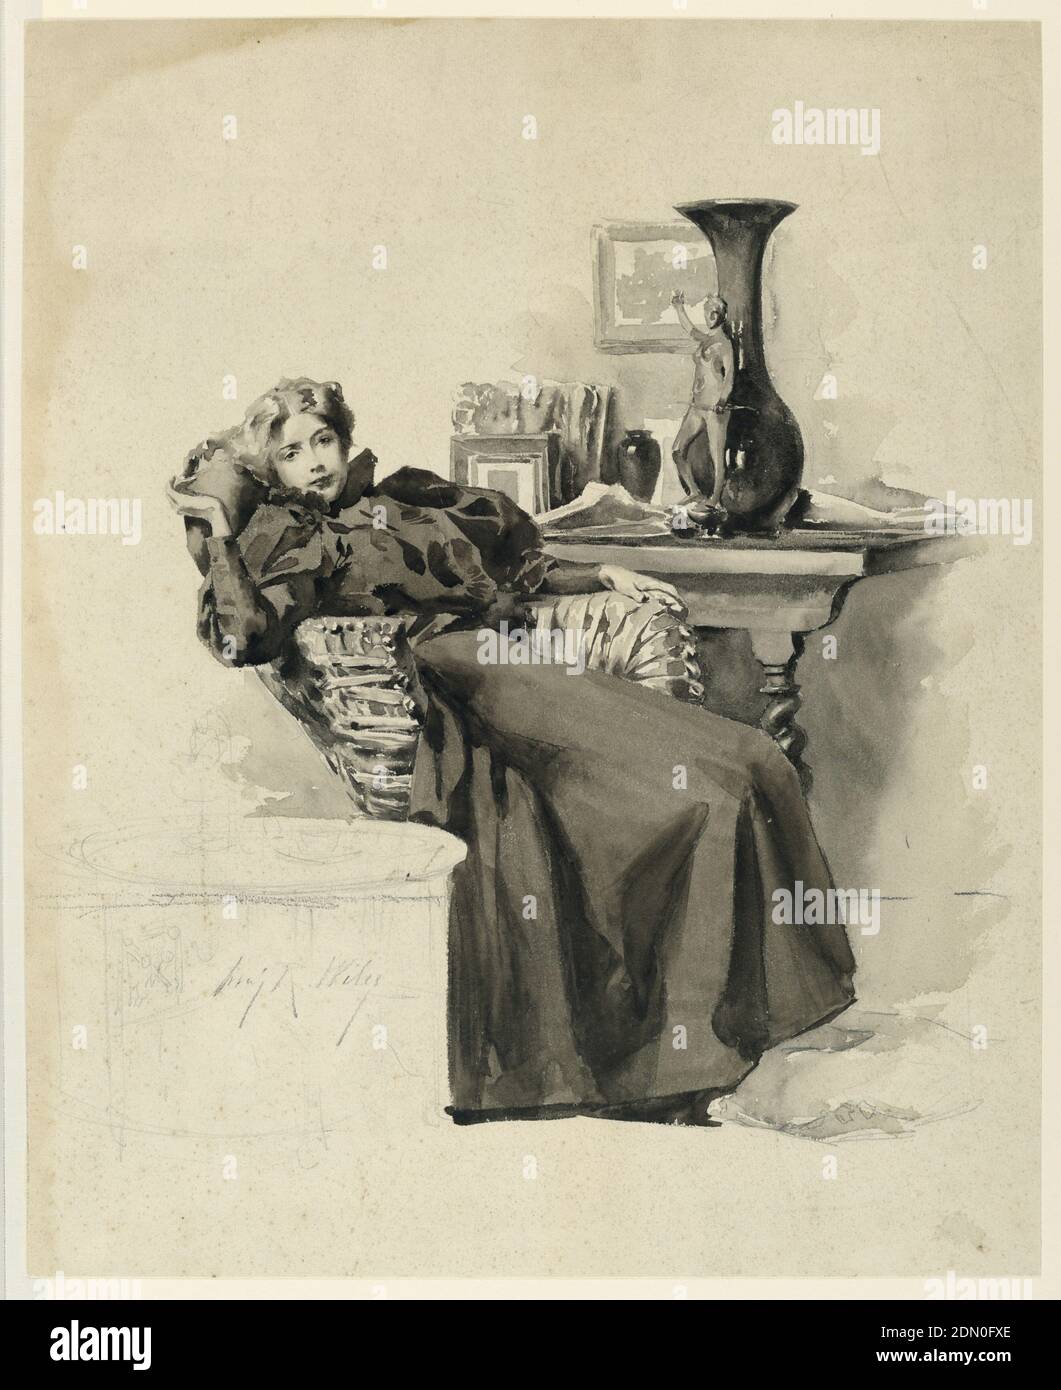 Girl in a Wicker Chair, Irving Ramsey Wiles, American, 1861–1948, Brush and watercolor, graphite on illustration board, A woman, dressed in clothing from the 1890s, reclines in a wicker chair, a table with still life behind her. Another table with a tea pot and cup is lightly sketched in graphite, lower left., USA, ca. 1890, figures, Drawing Stock Photo